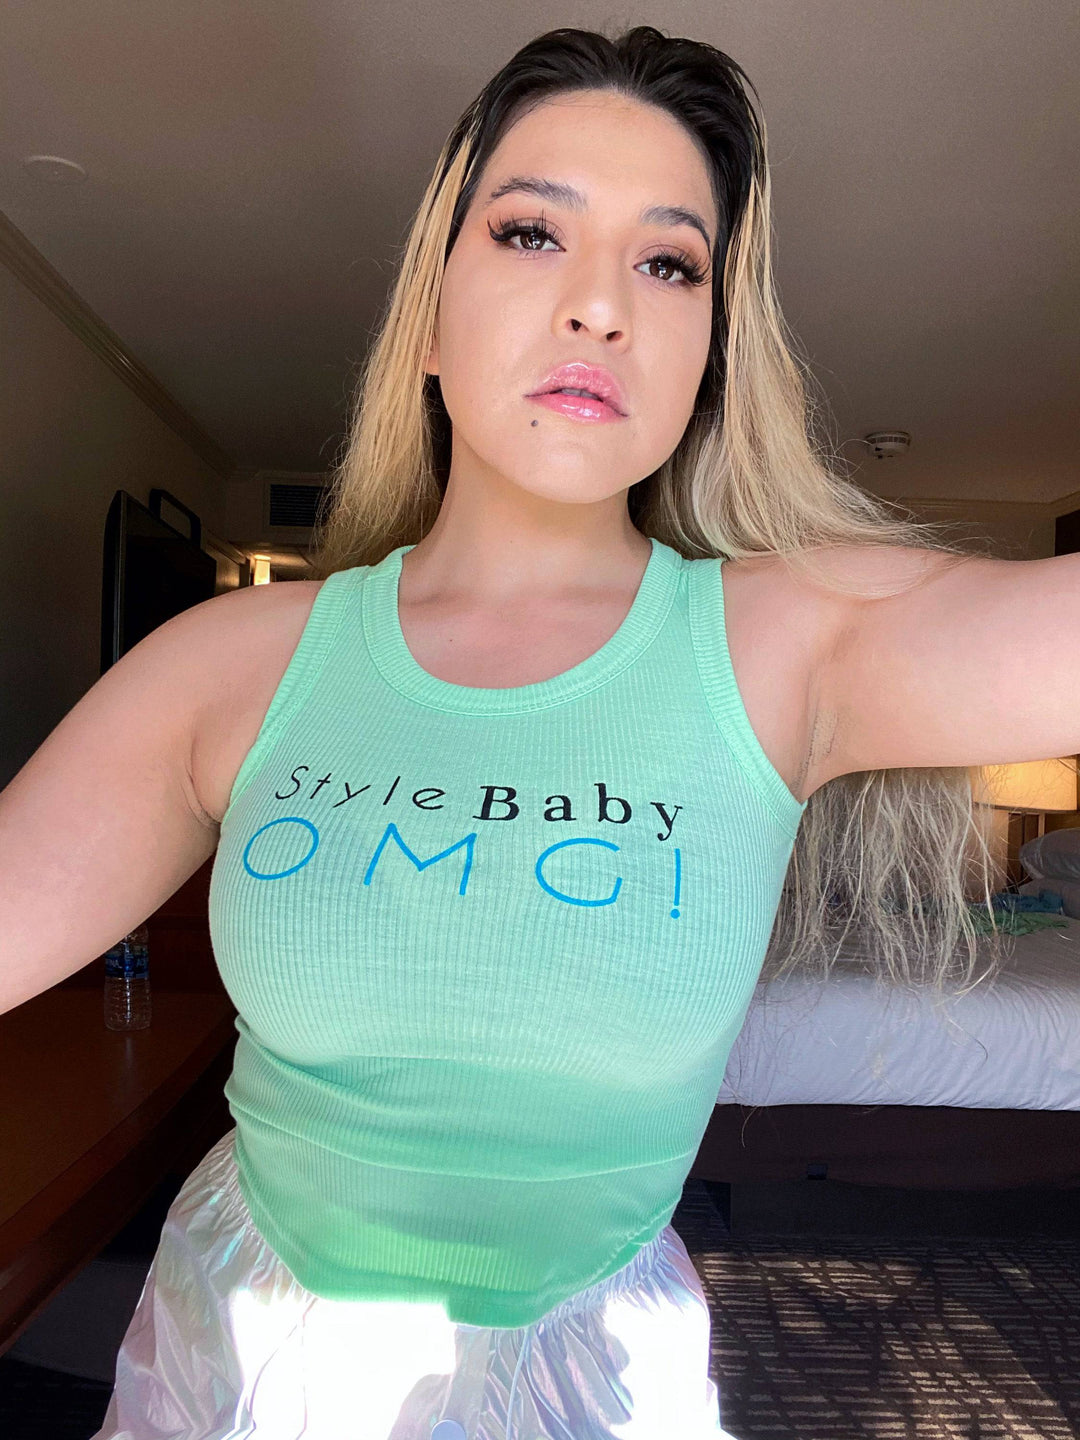 SBO Green Tank Top - Style Baby OMG Fashion Boutique - Stylebabyomg - Buy - Aesthetic Baddie Outfits - Babyboo - OOTD - Shie 